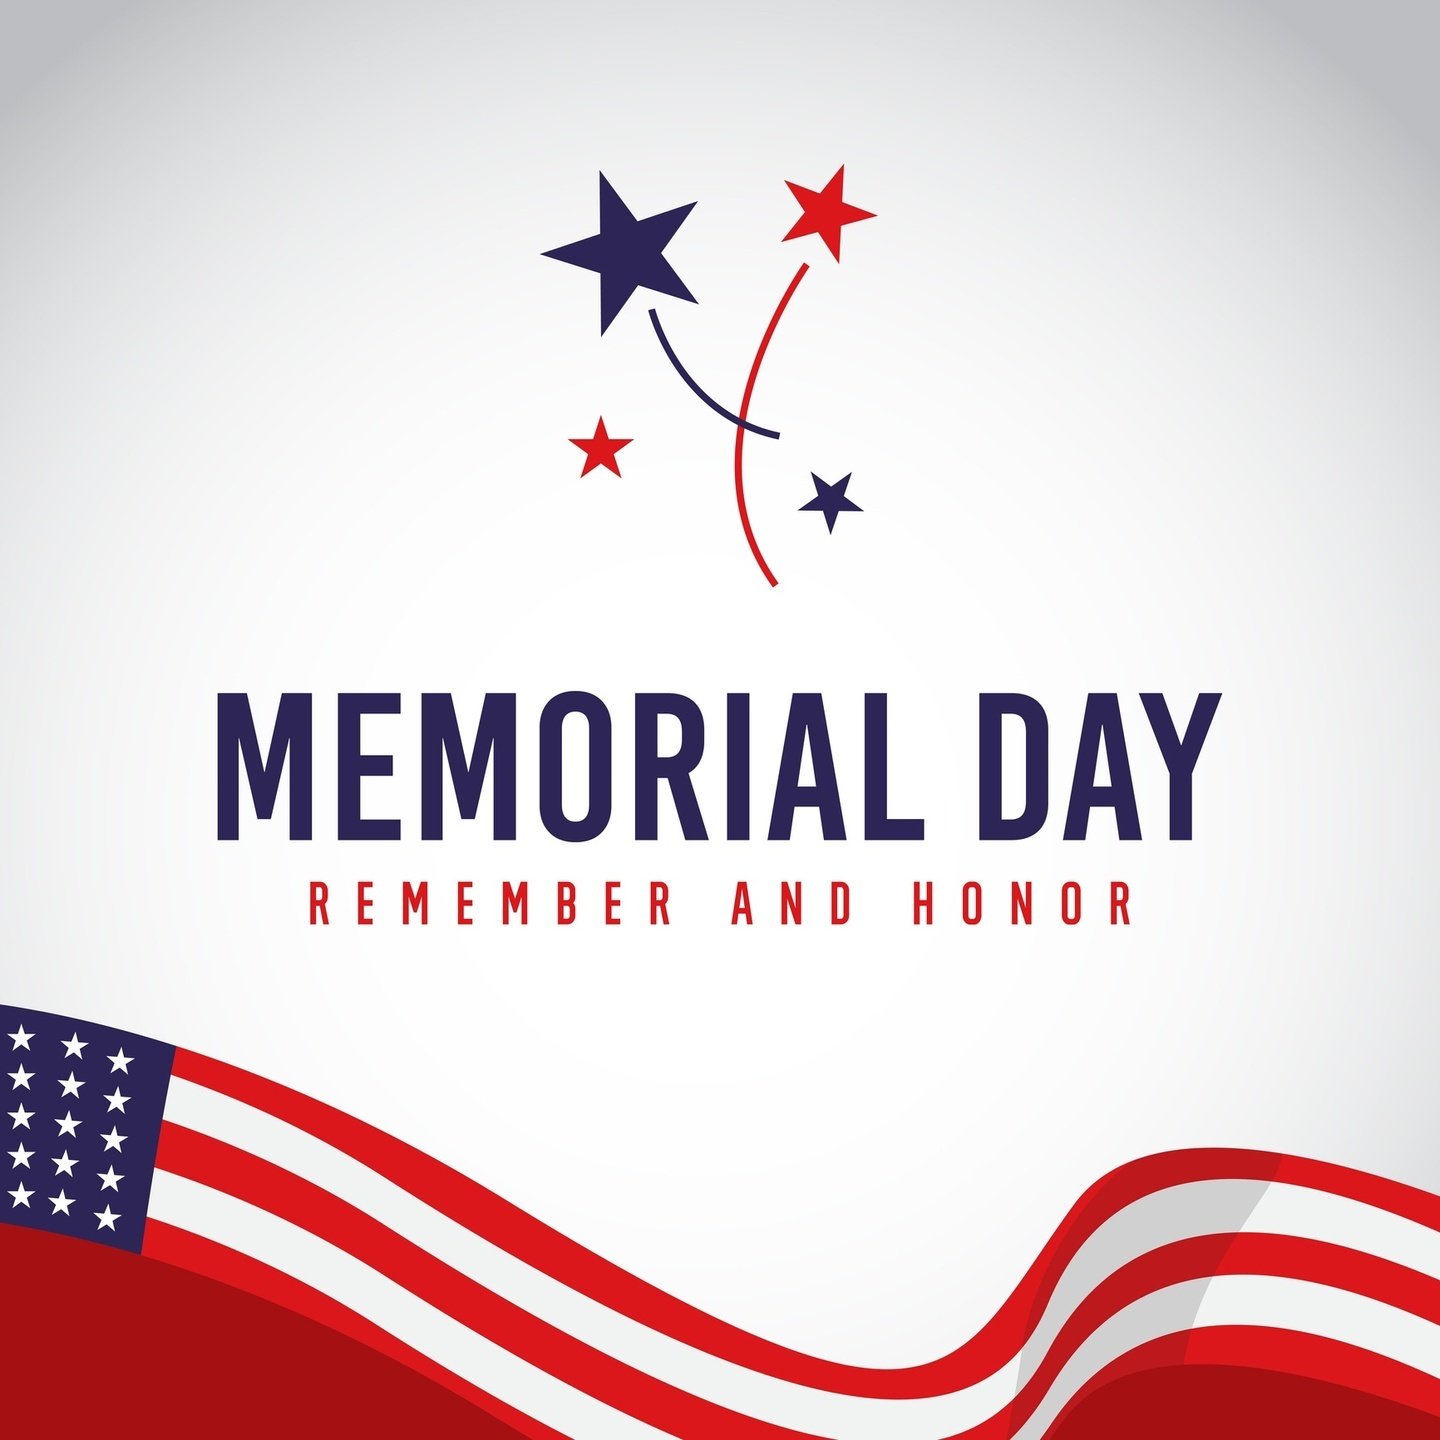 Please note our club hours &amp; events this Memorial Day:

Club Hours: 6am - 1pm
Kids Club: Closed

Group Exercise Events:
8:30 am Open Murphy Workout
10:30 am Body Balance with Del
11:30 am BollyFit with Jaswinder